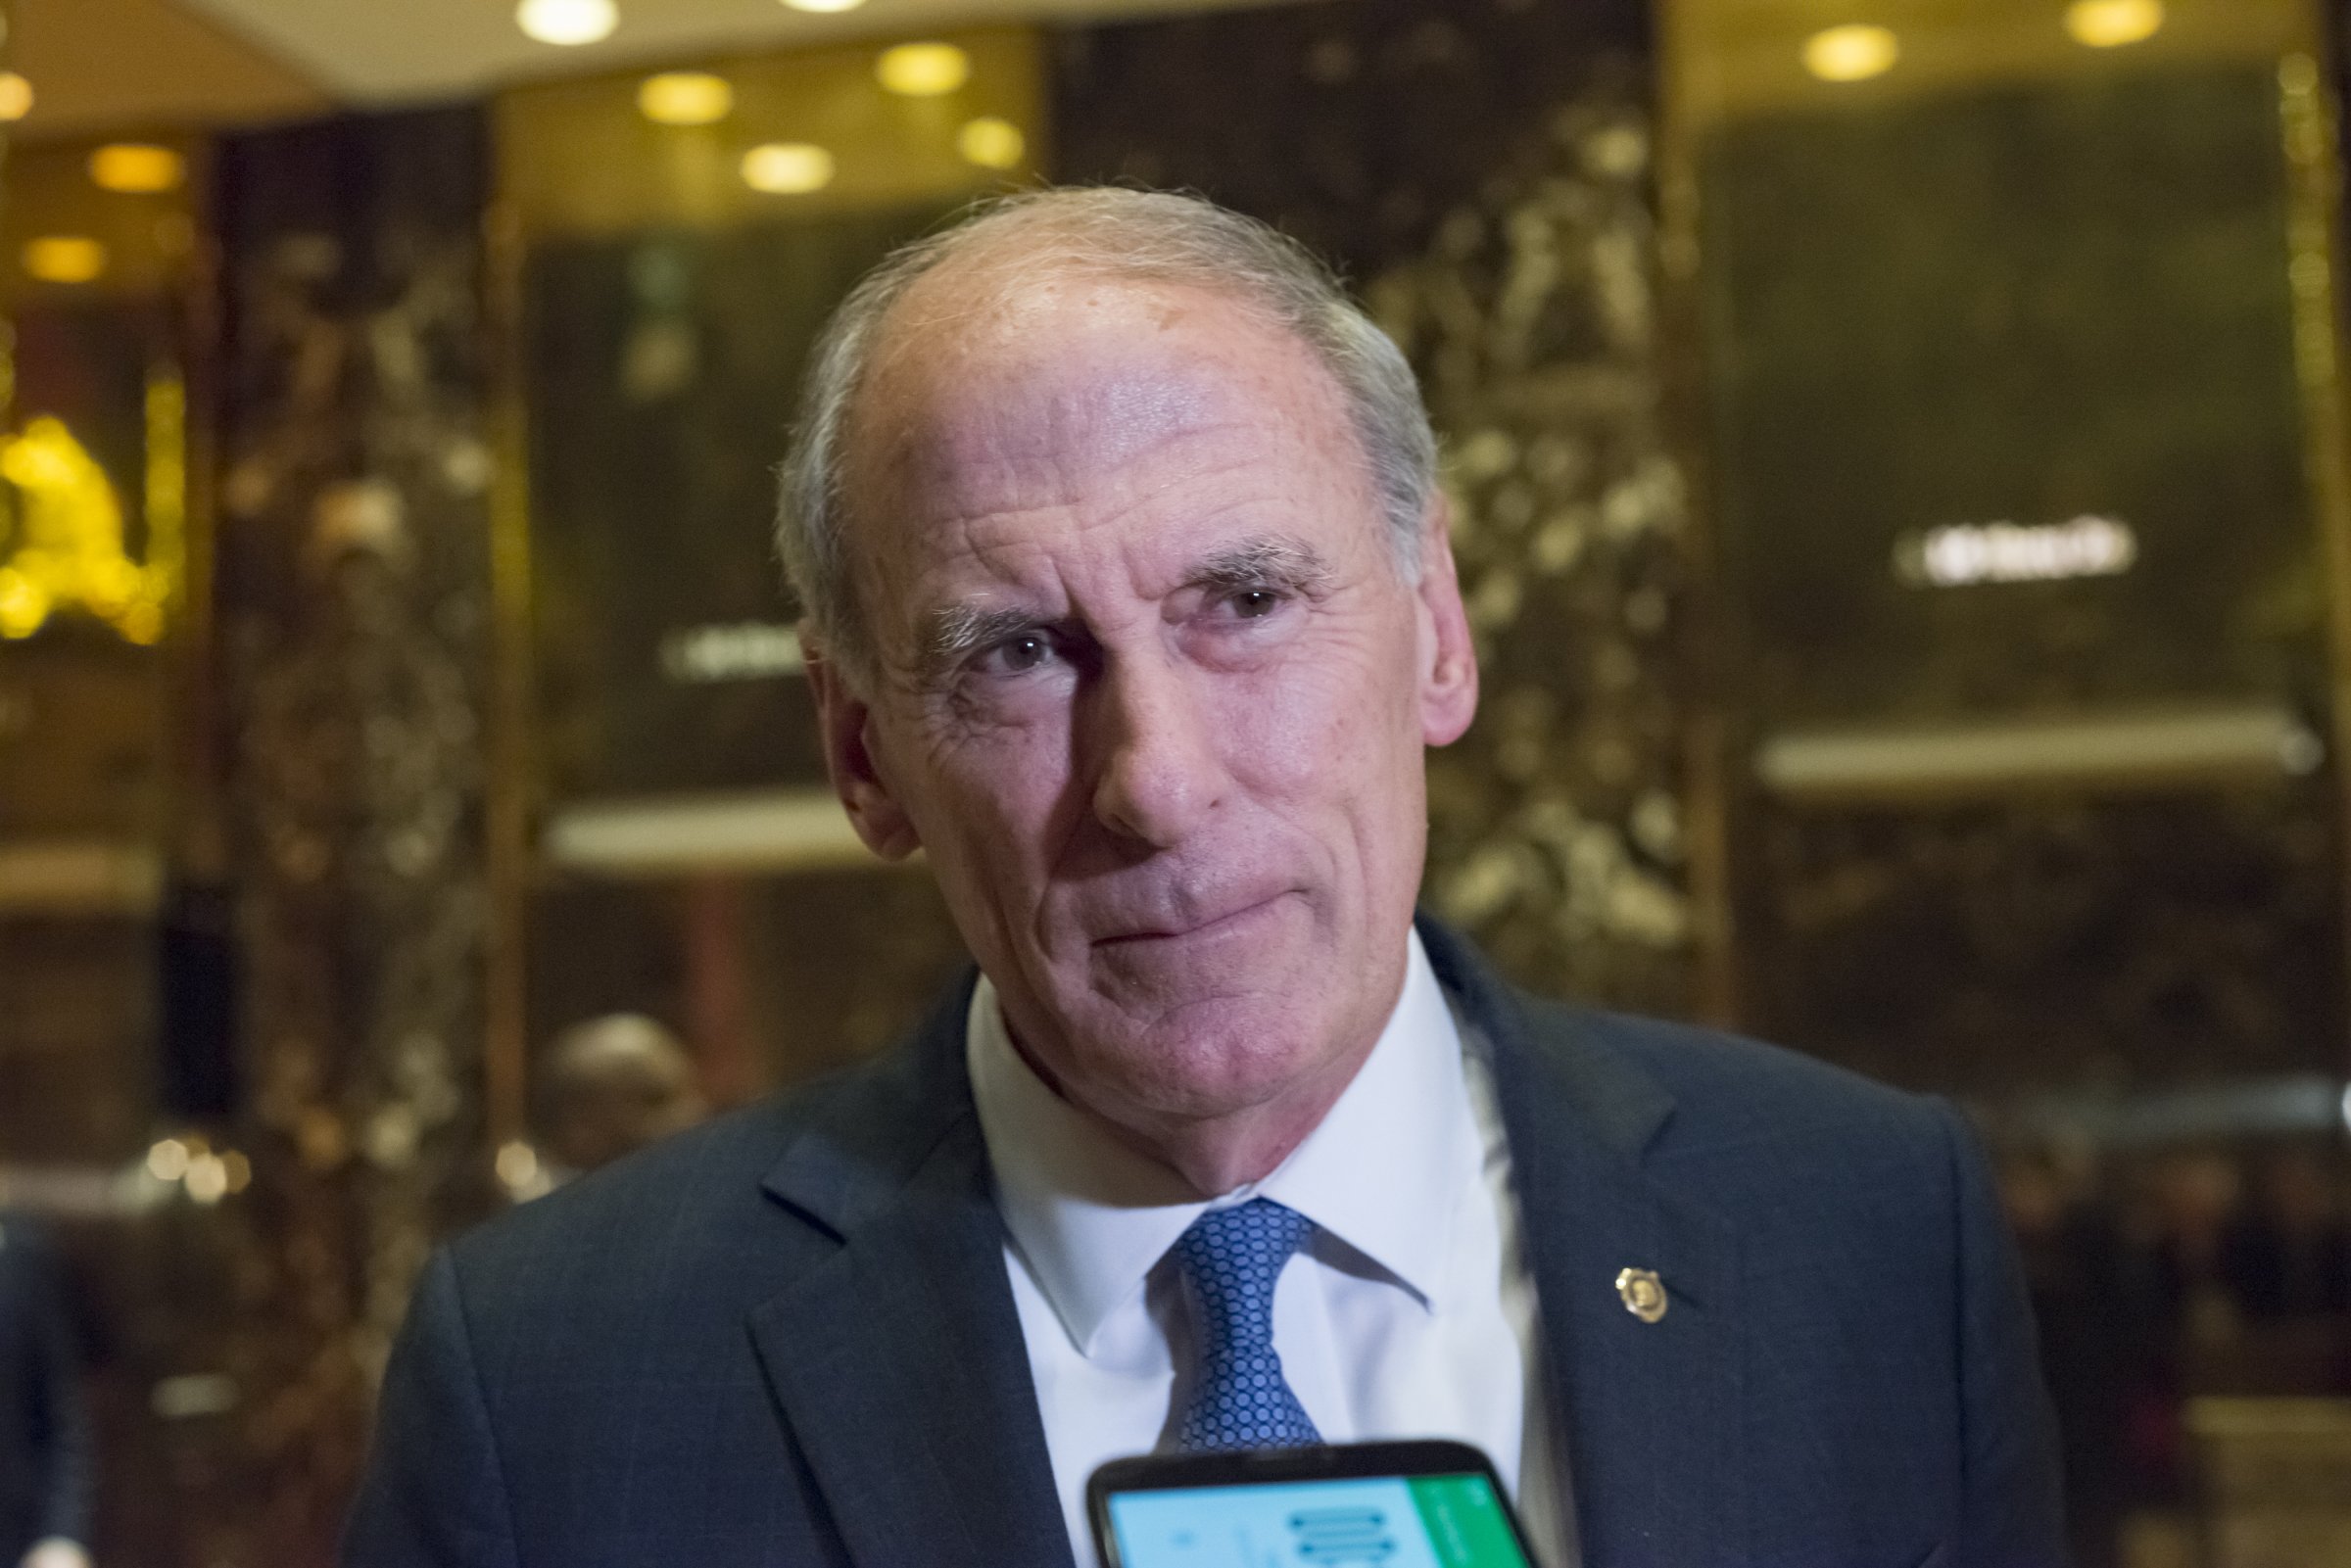 Senator Daniel Coats, a Republican from Indiana, pauses while speaking to the media in the lobby of Trump Tower in New York, U.S., on Wednesday, Nov. 30, 2016.